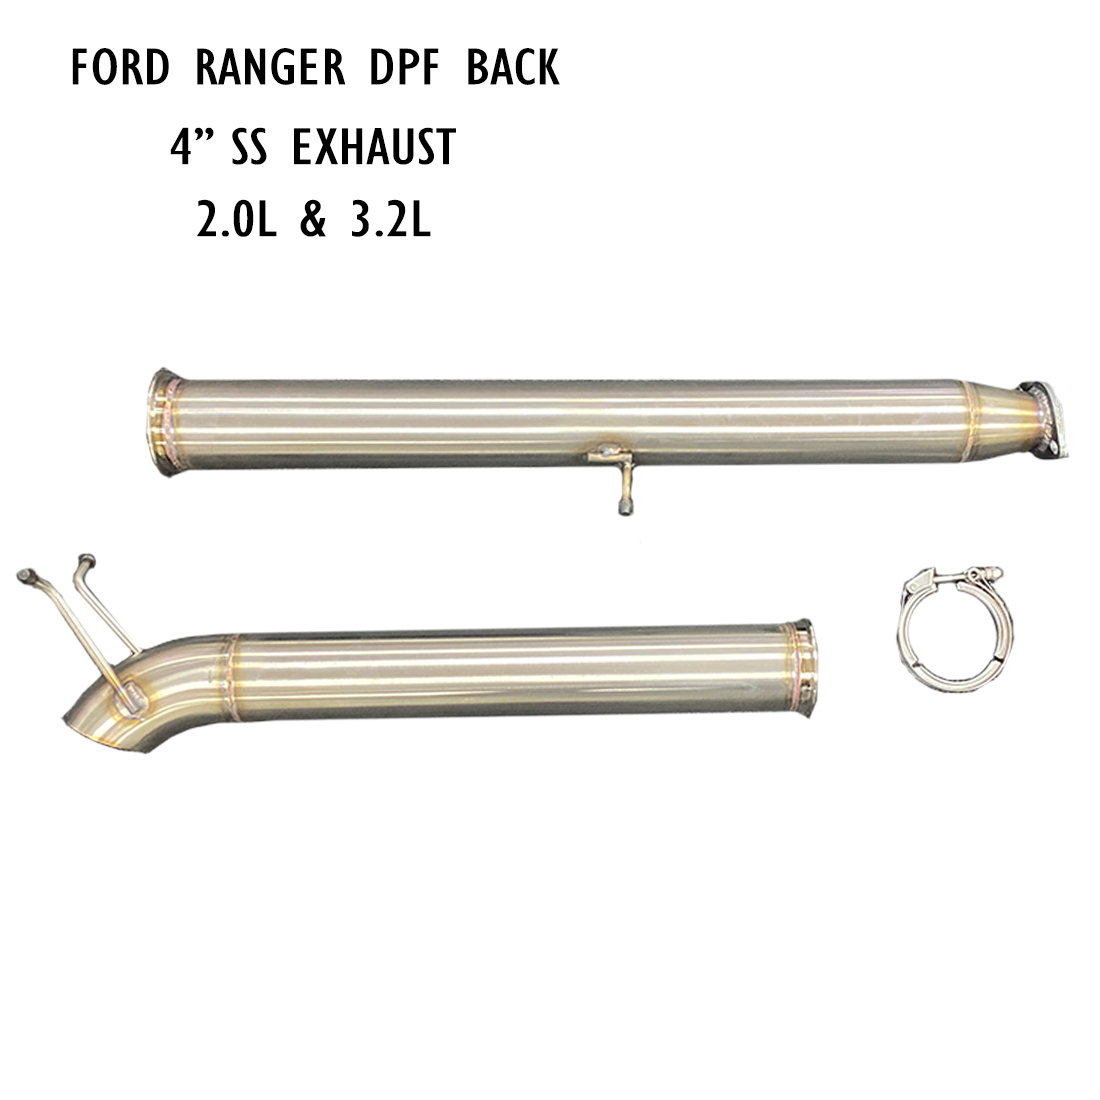 Ford PX Ranger 3.2L & 2.0L 4" DPF Exhaust Stainless Steel image